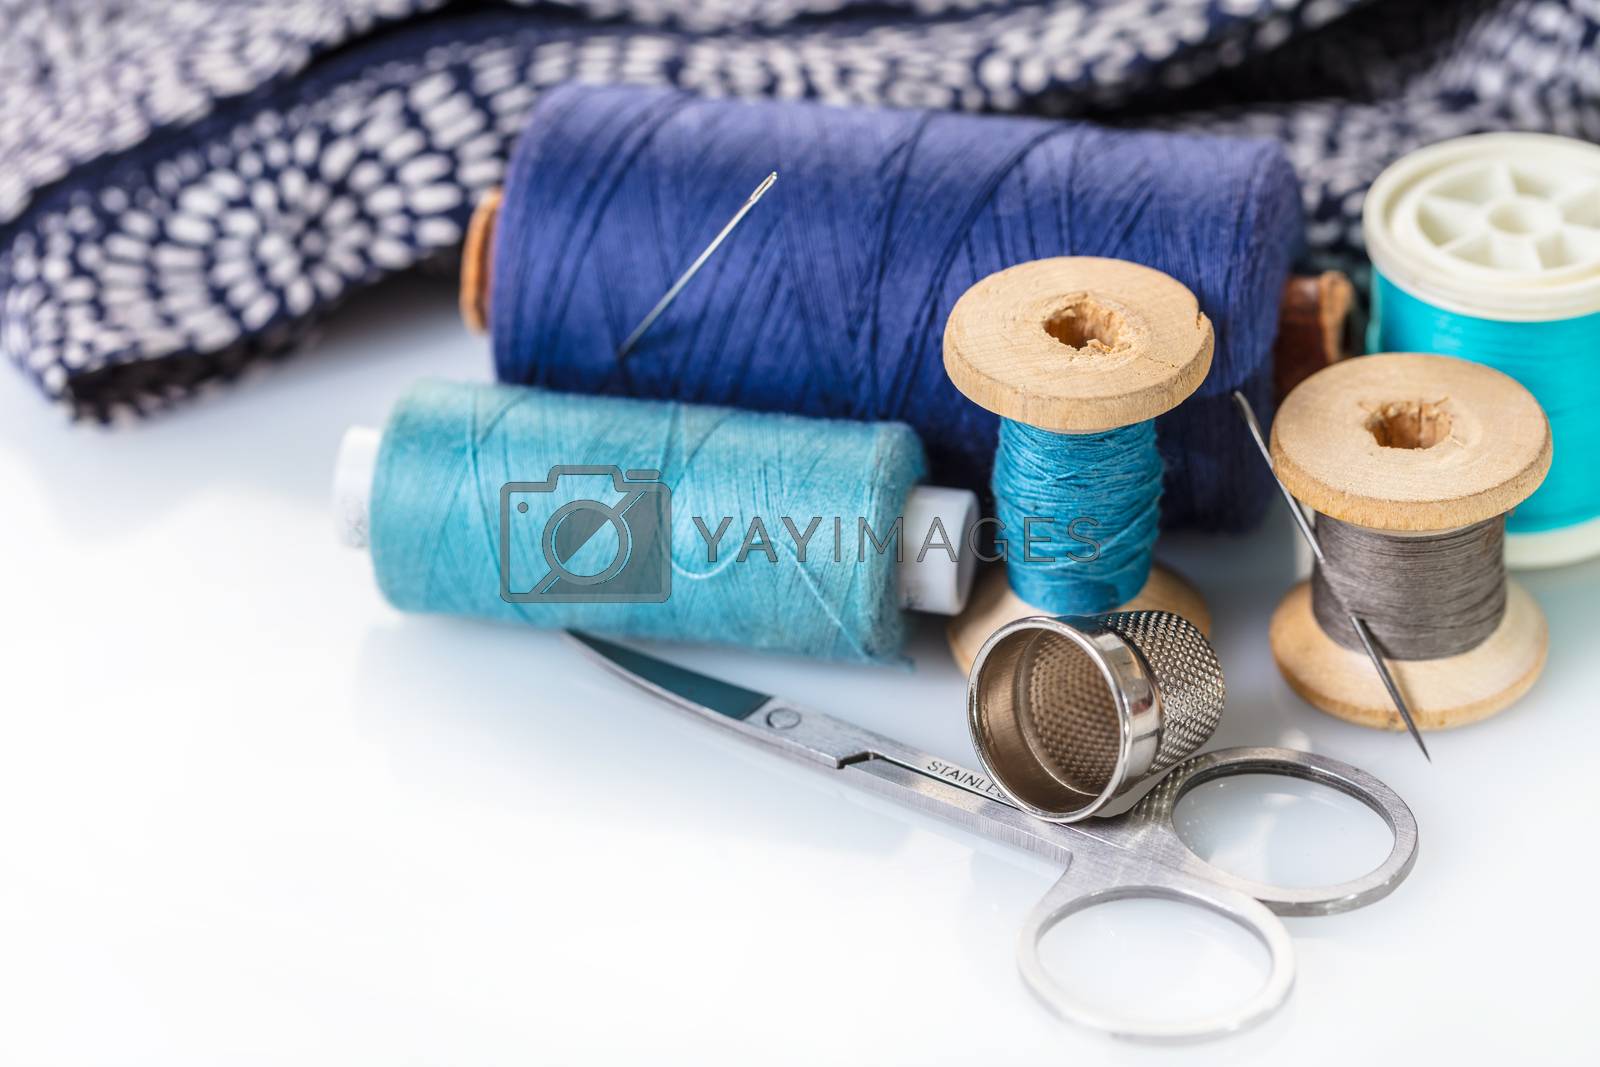 Royalty free image of Sewing accessories and cloth  by MegaArt